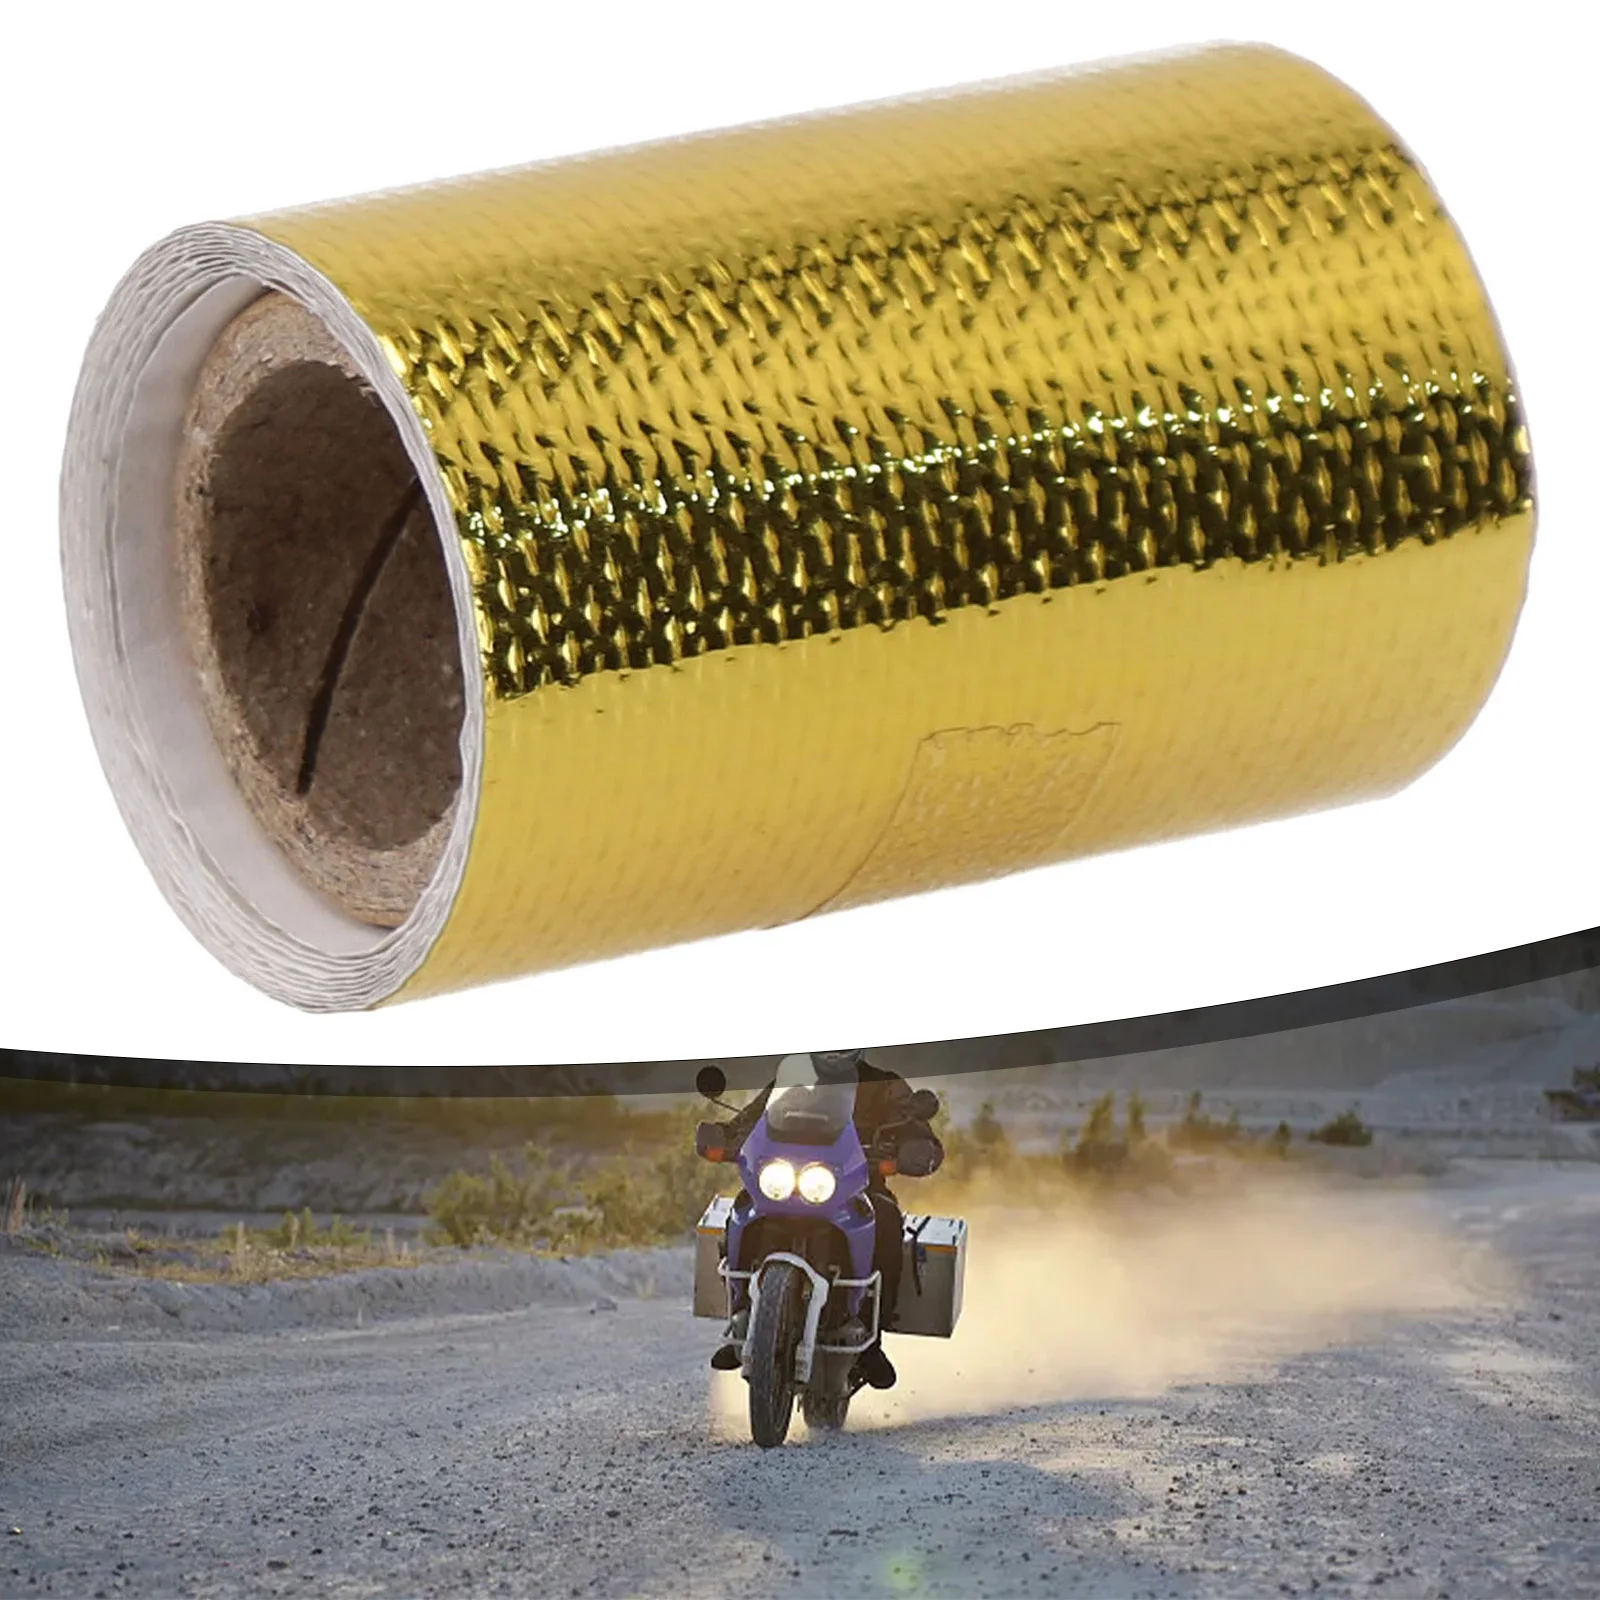 

Universal Motorcycle Car Gold Thermal Exhaust Tape Air Intake Heat Insulation Shield Wrap Reflective 2021 Accessories